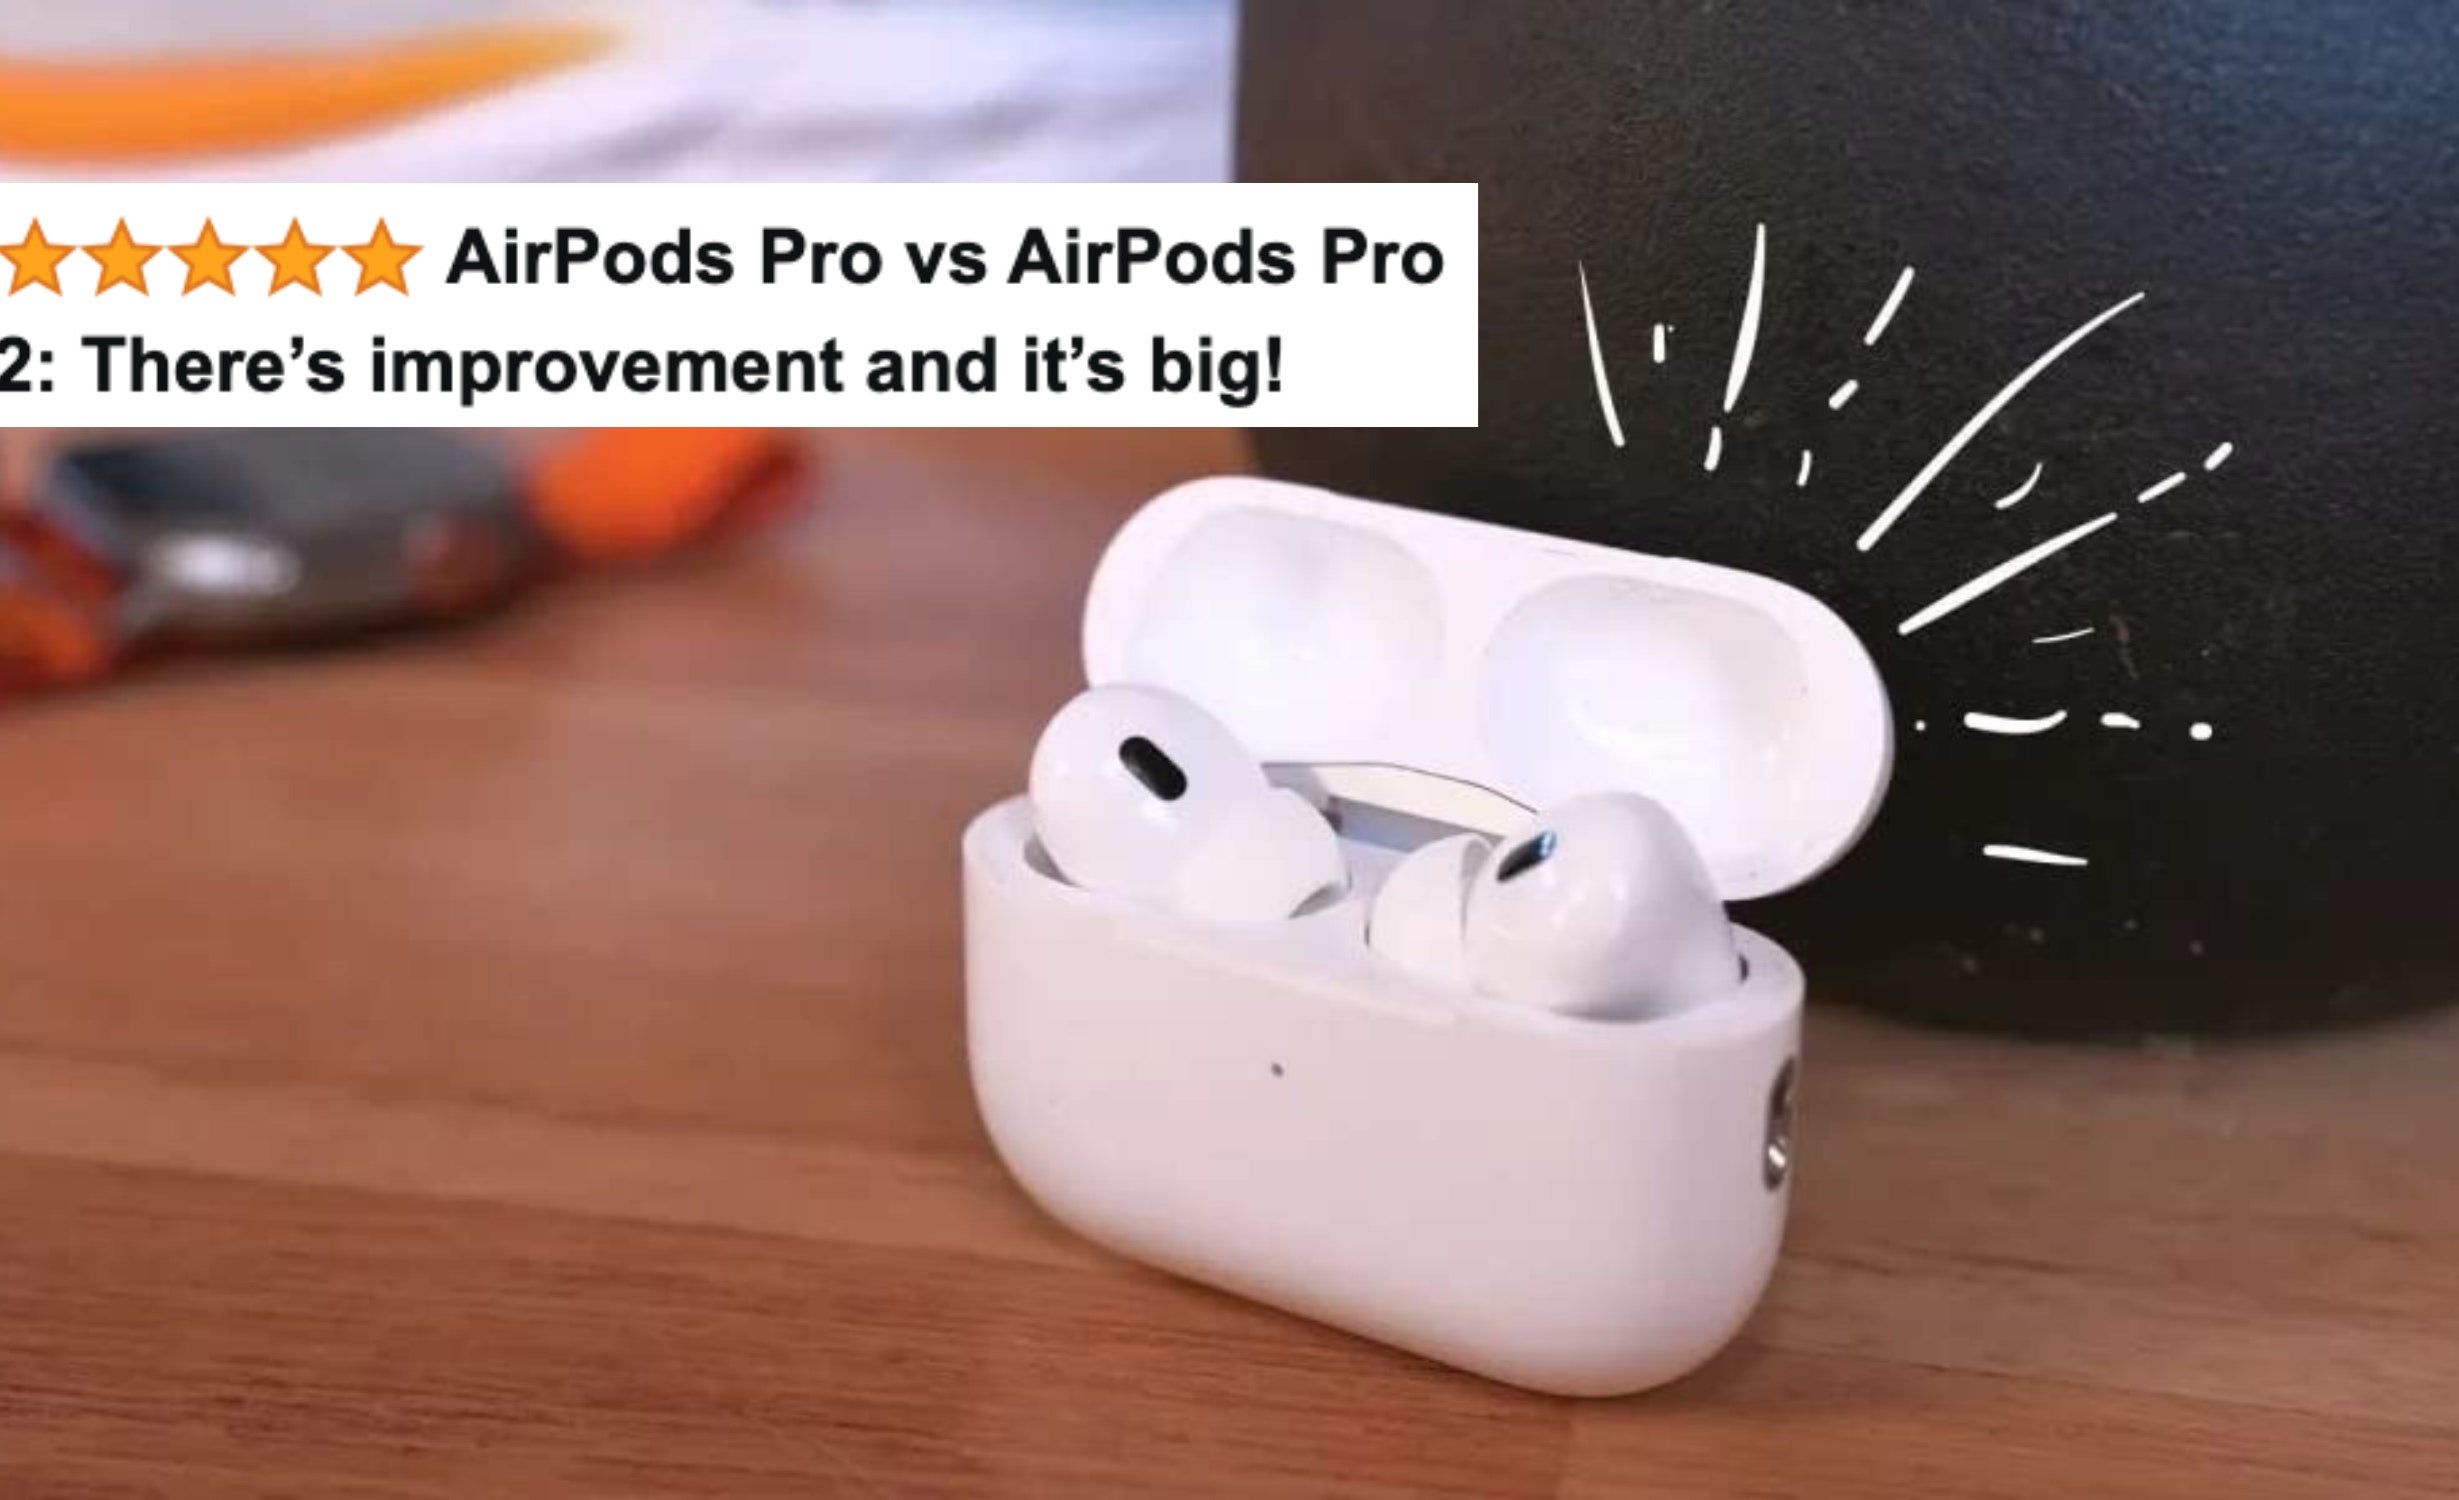 A reviewer&#x27;s airpods with five-star review text &quot;airpods pro vs airpods pro 2: there&#x27;s improvement and it&#x27;s big!&quot;